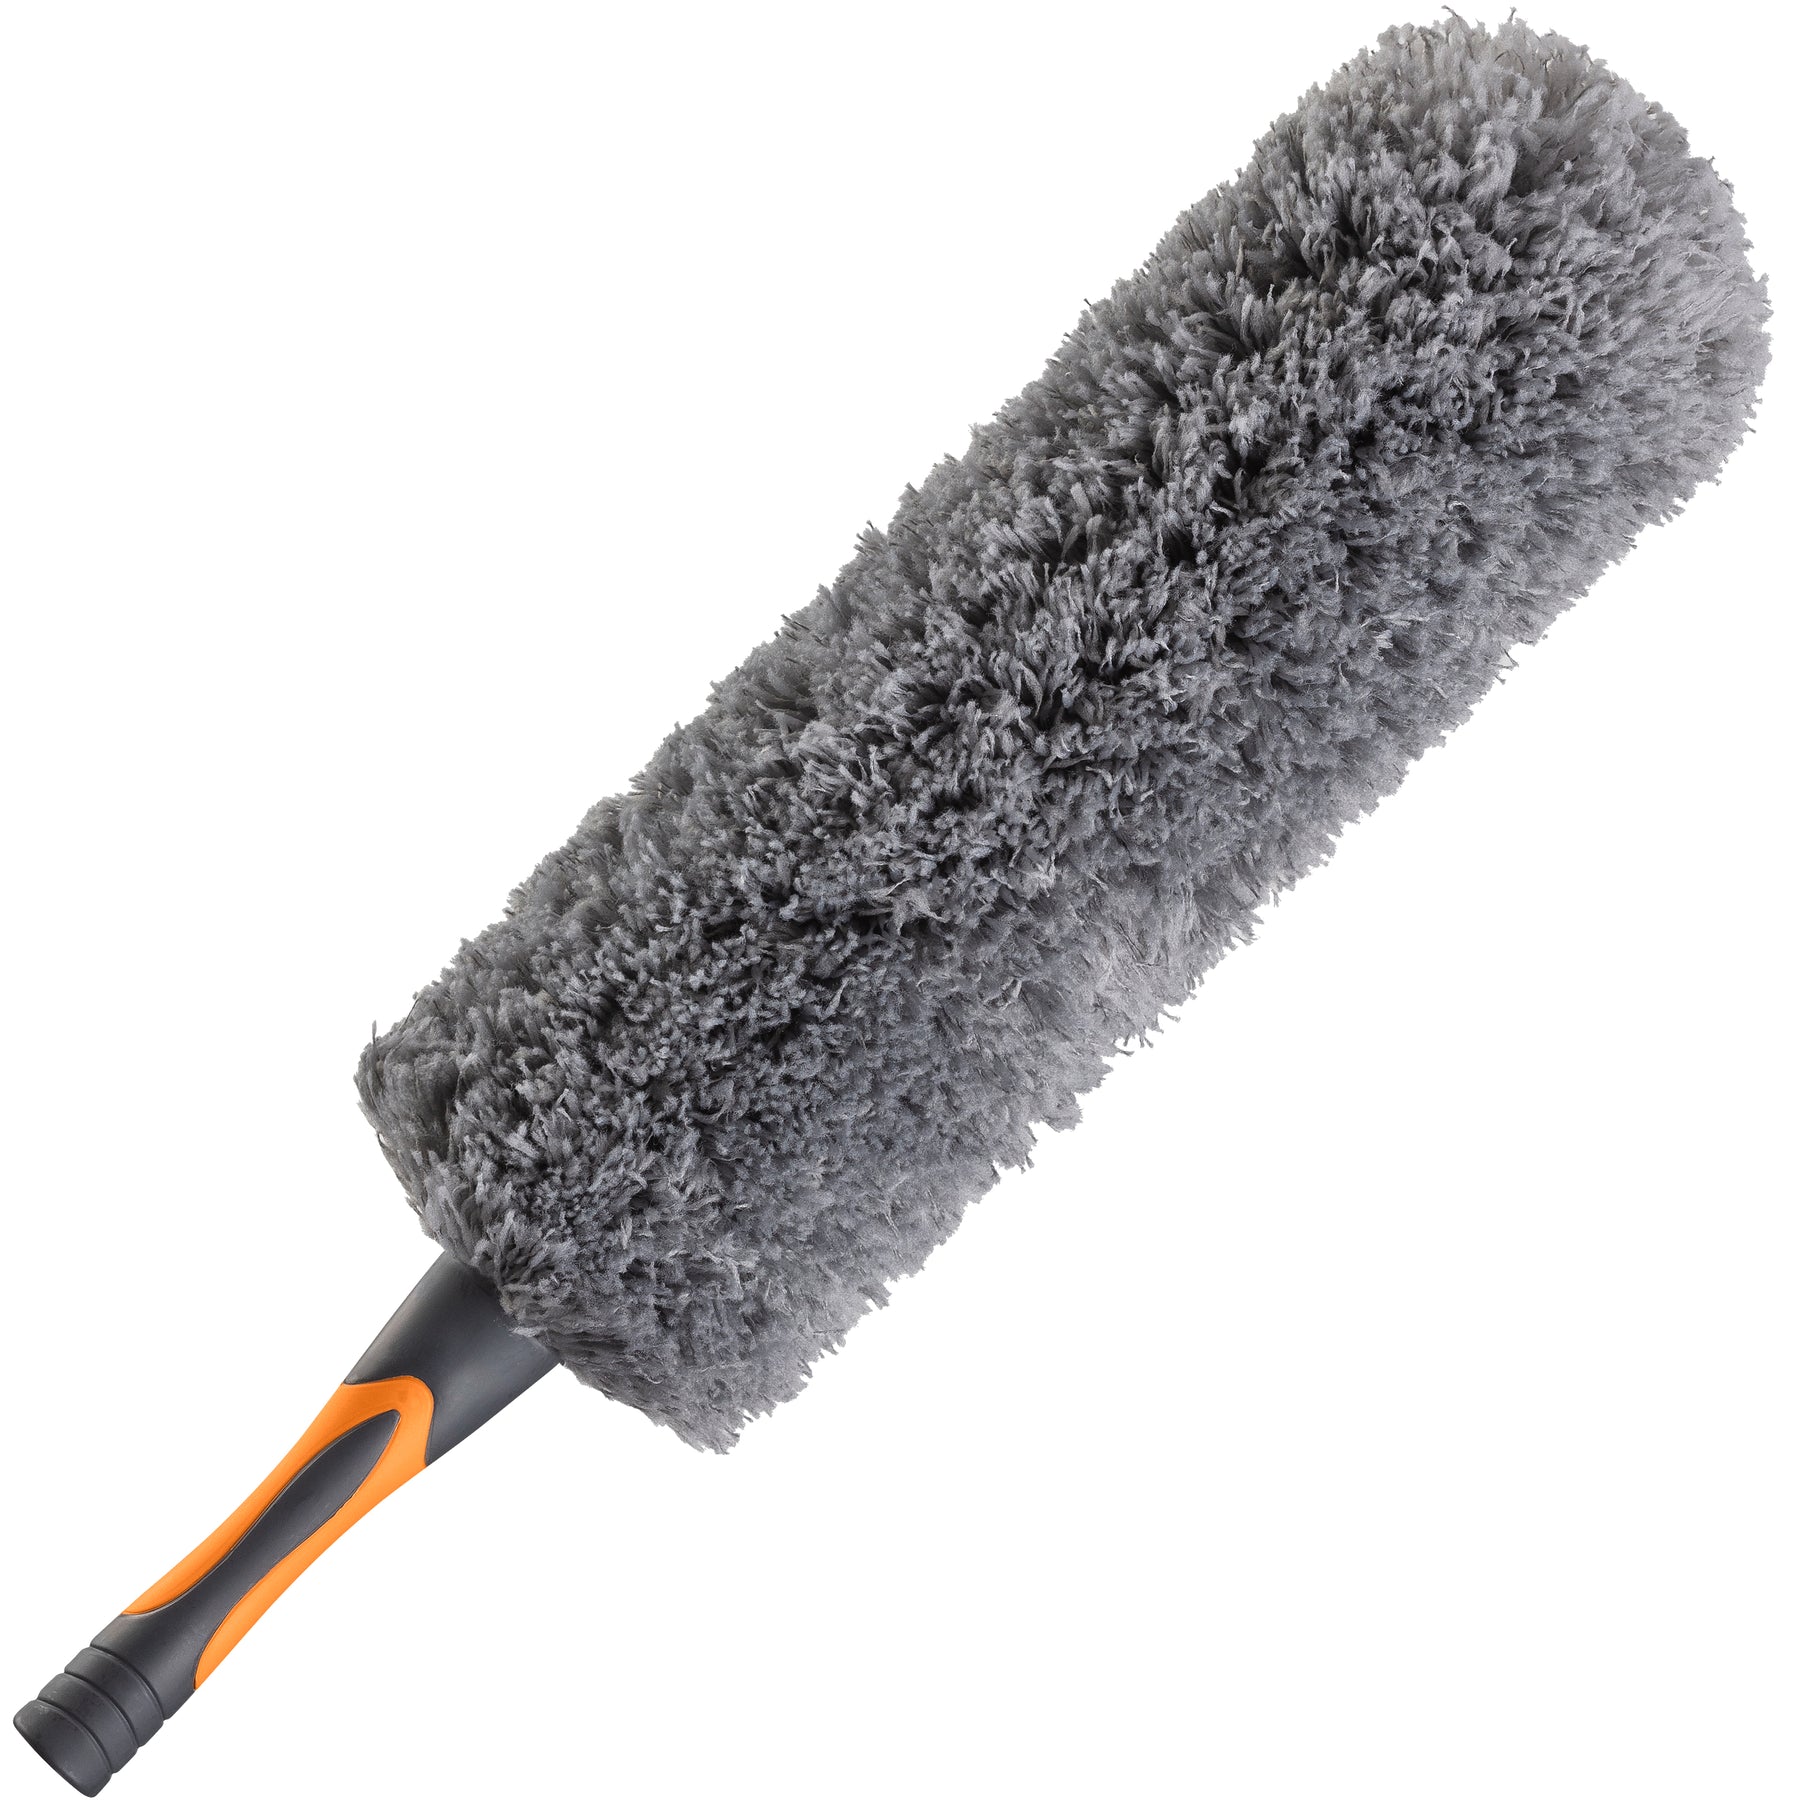 EVERSPROUT Flexible Microfiber Feather Duster | 17-inch Brush Head with  Hand-Grip | Lightweight, Attracts Dust | Twists onto Standard Acme Threaded